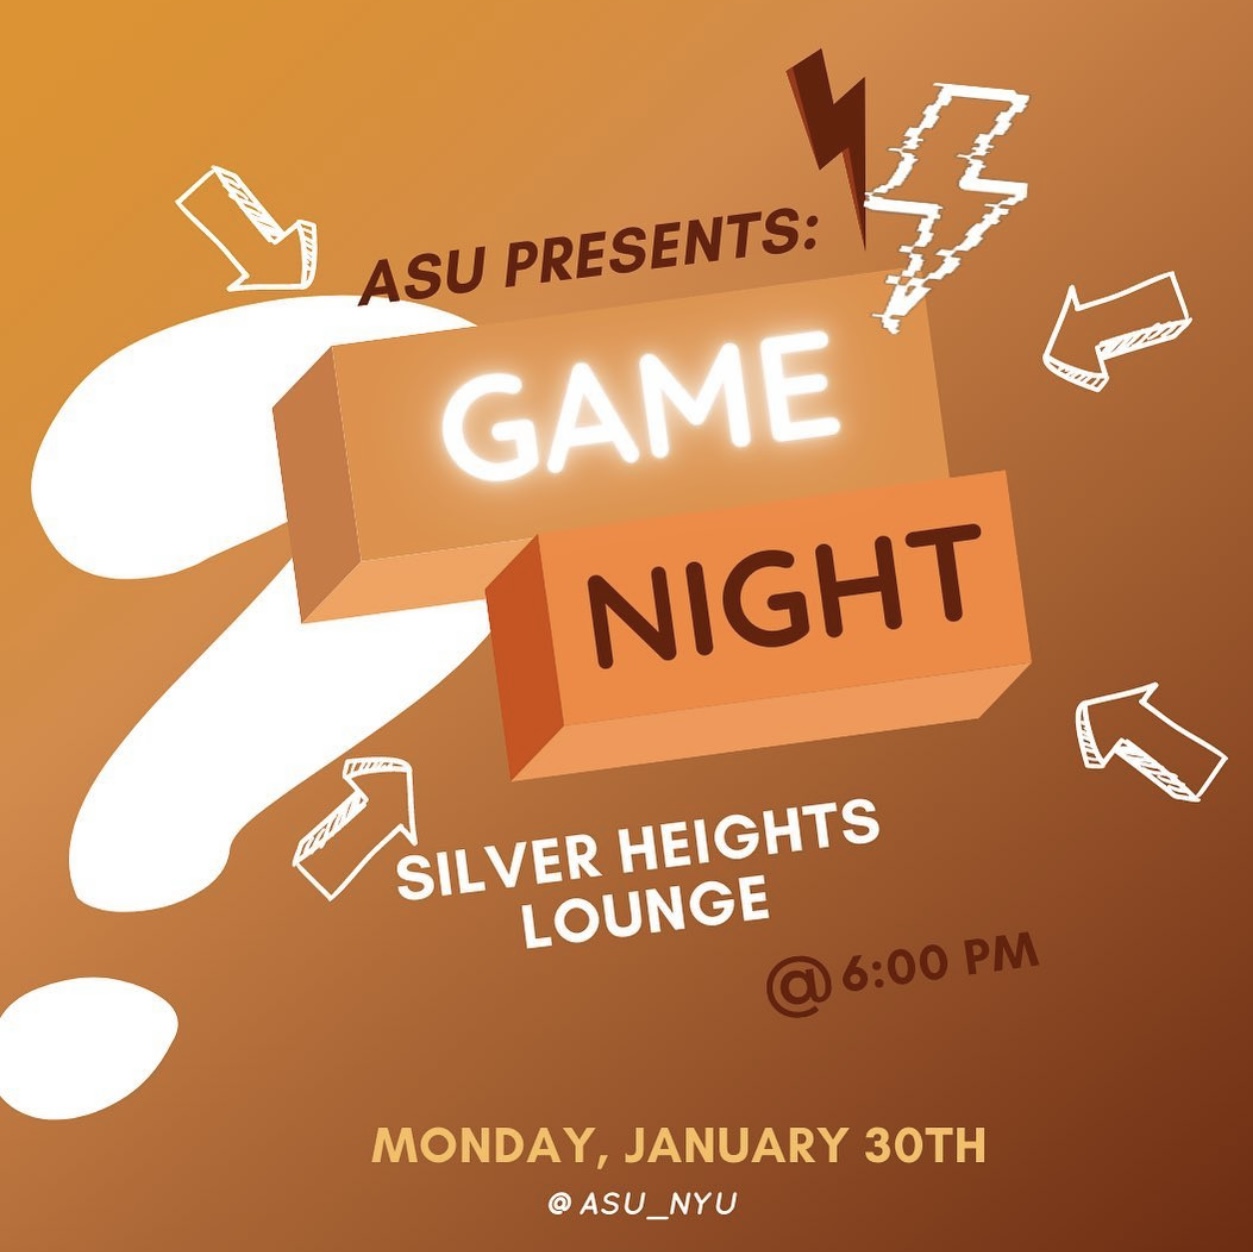 A marketing poster for ASU Game Night.